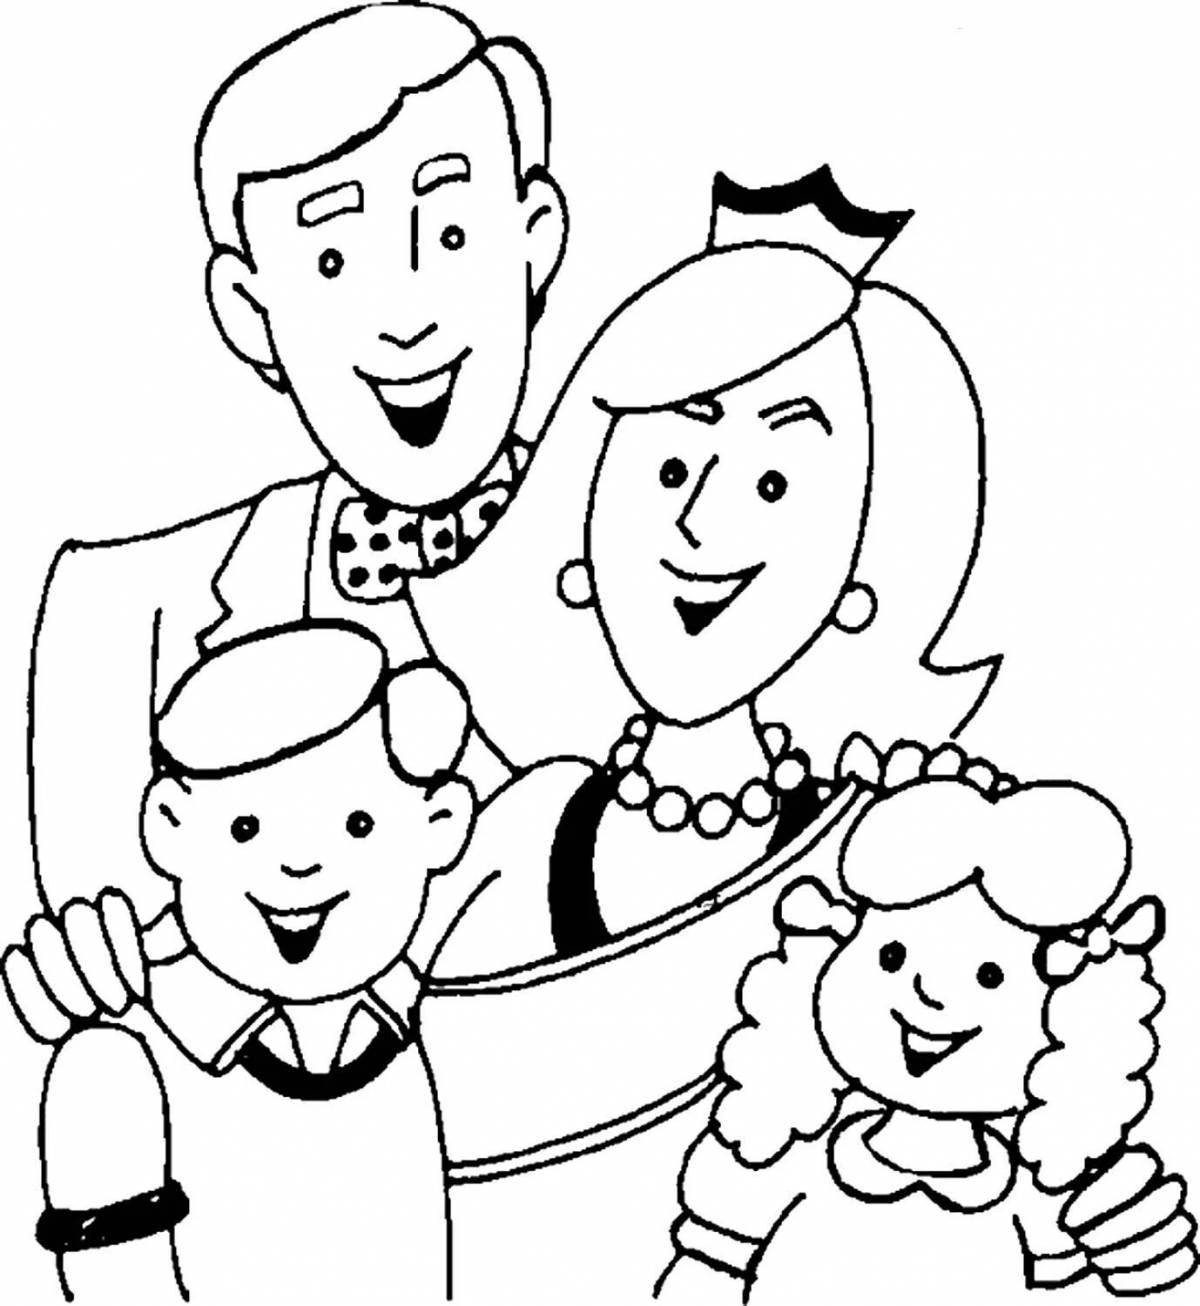 Fancy family coloring book for kids